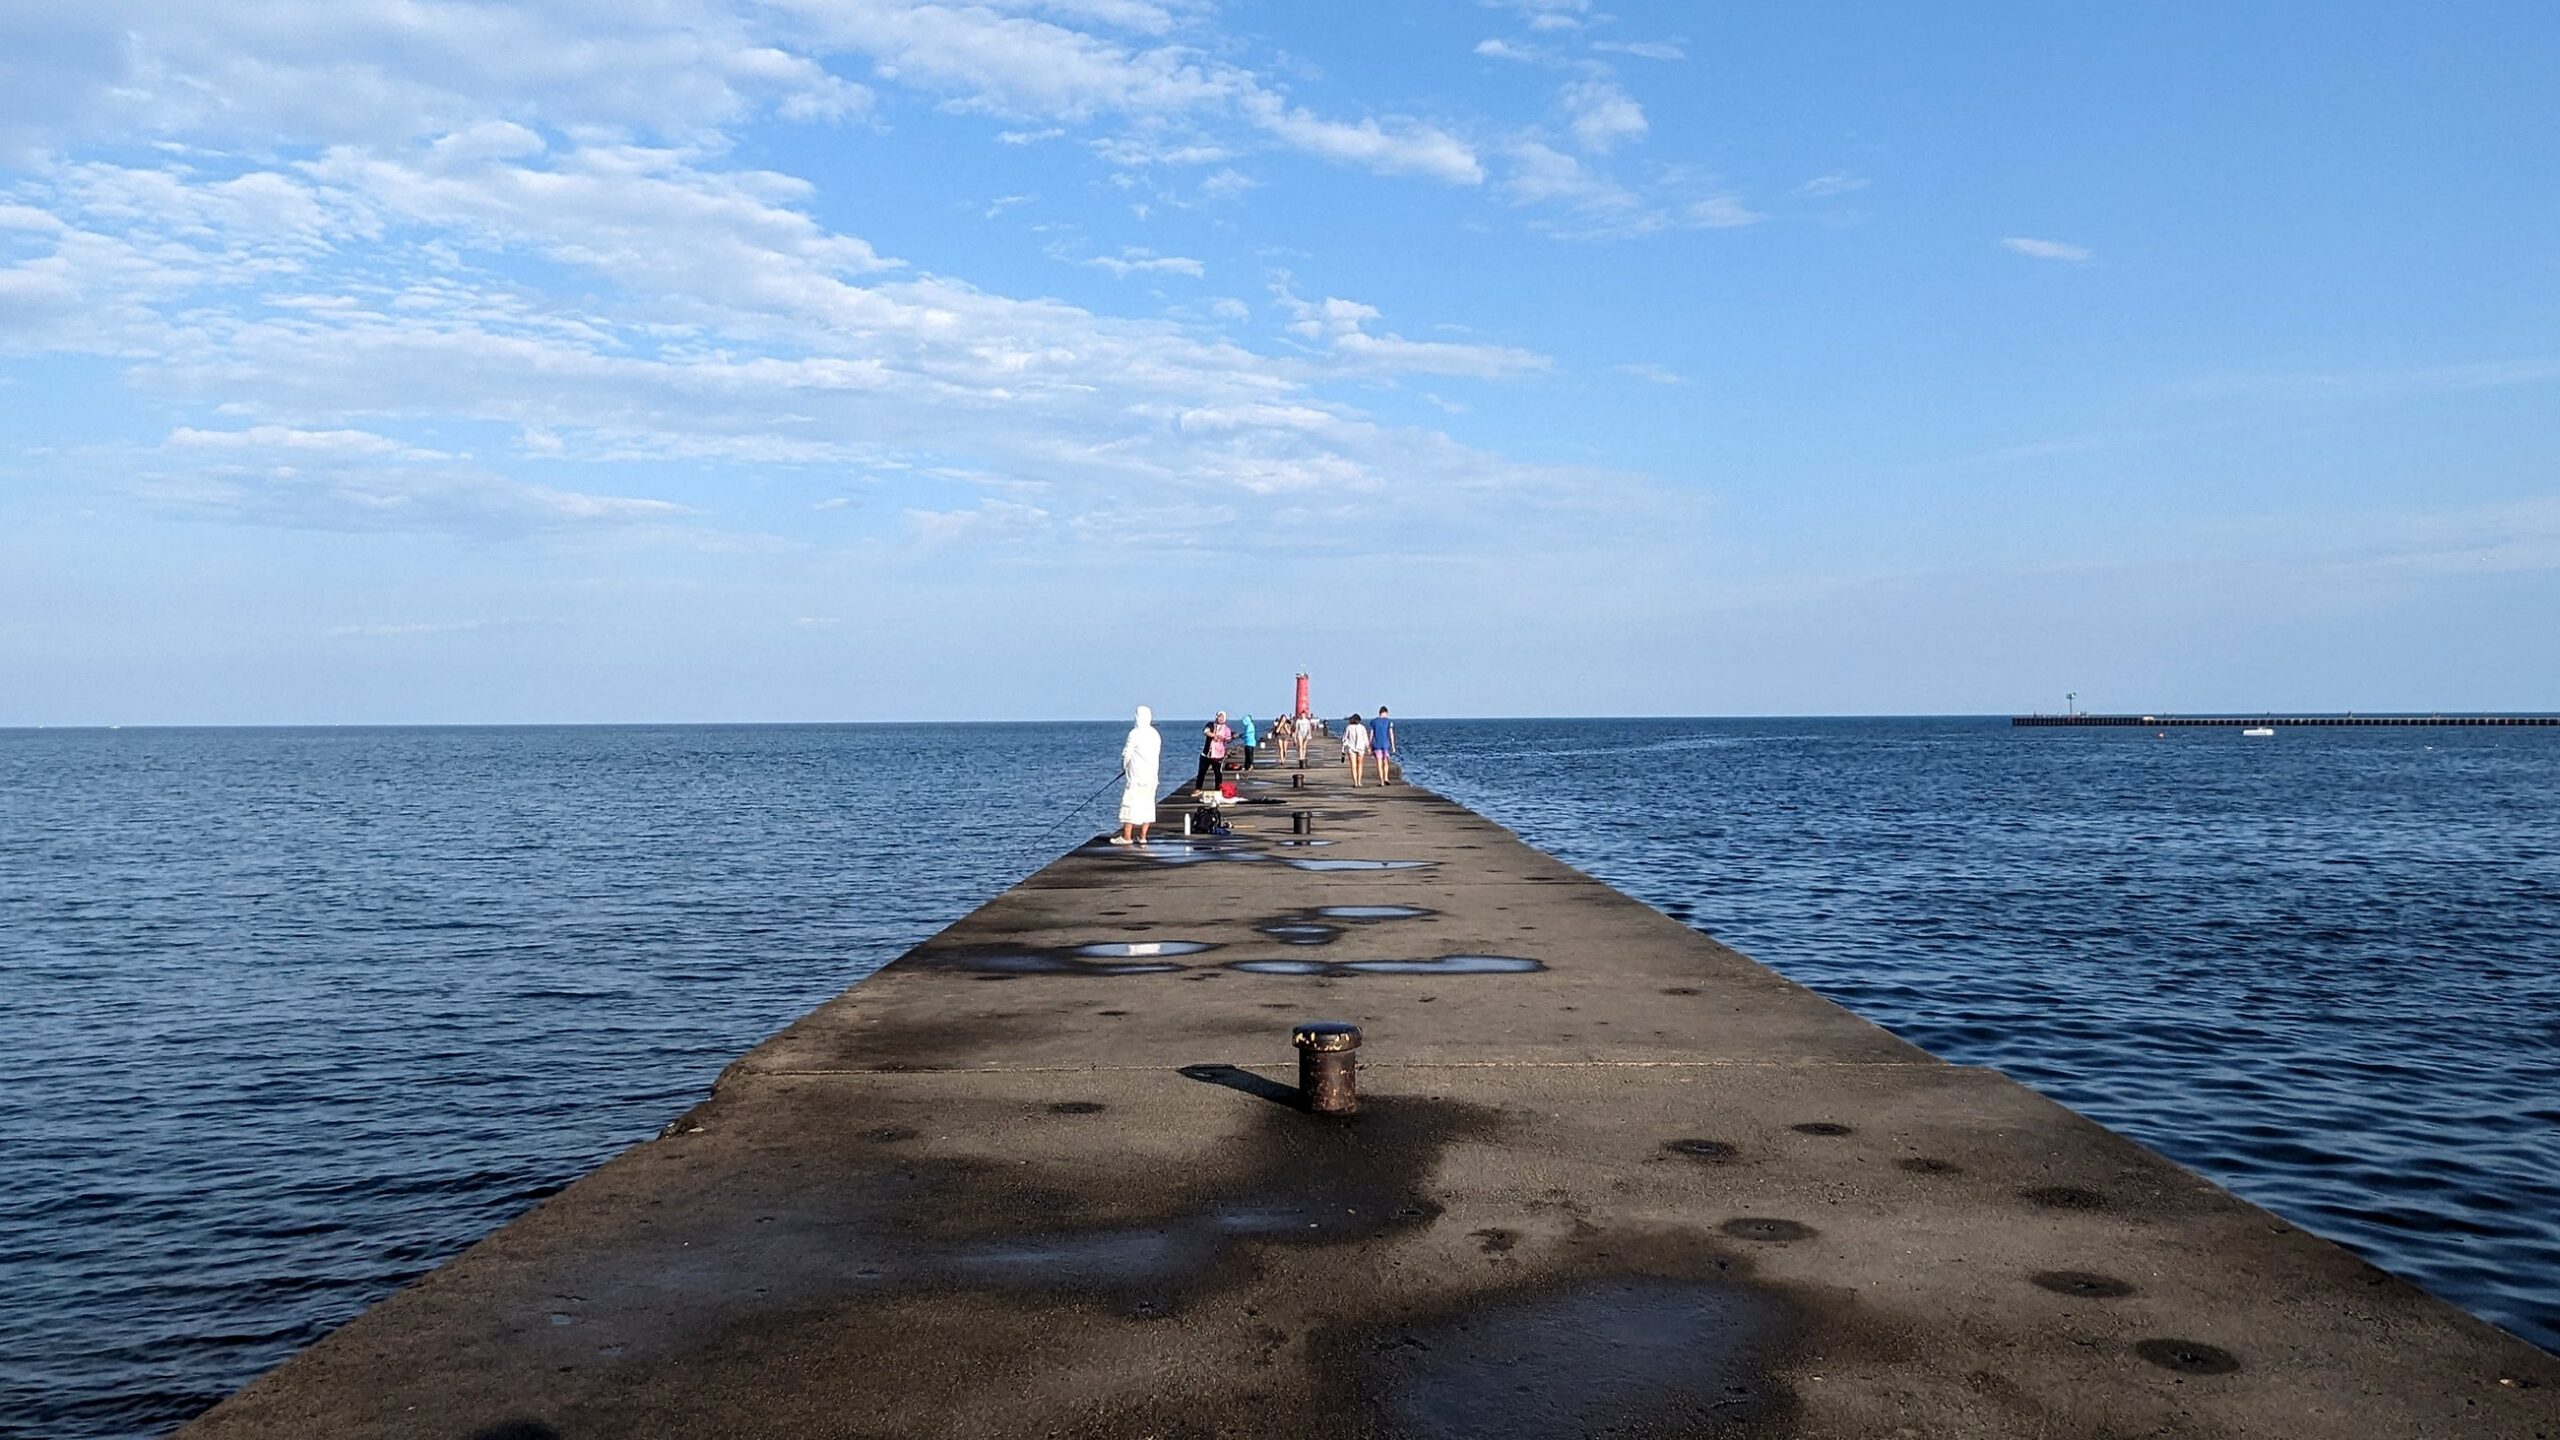 A concrete bridge with puddles extends out across Lake Michigan.